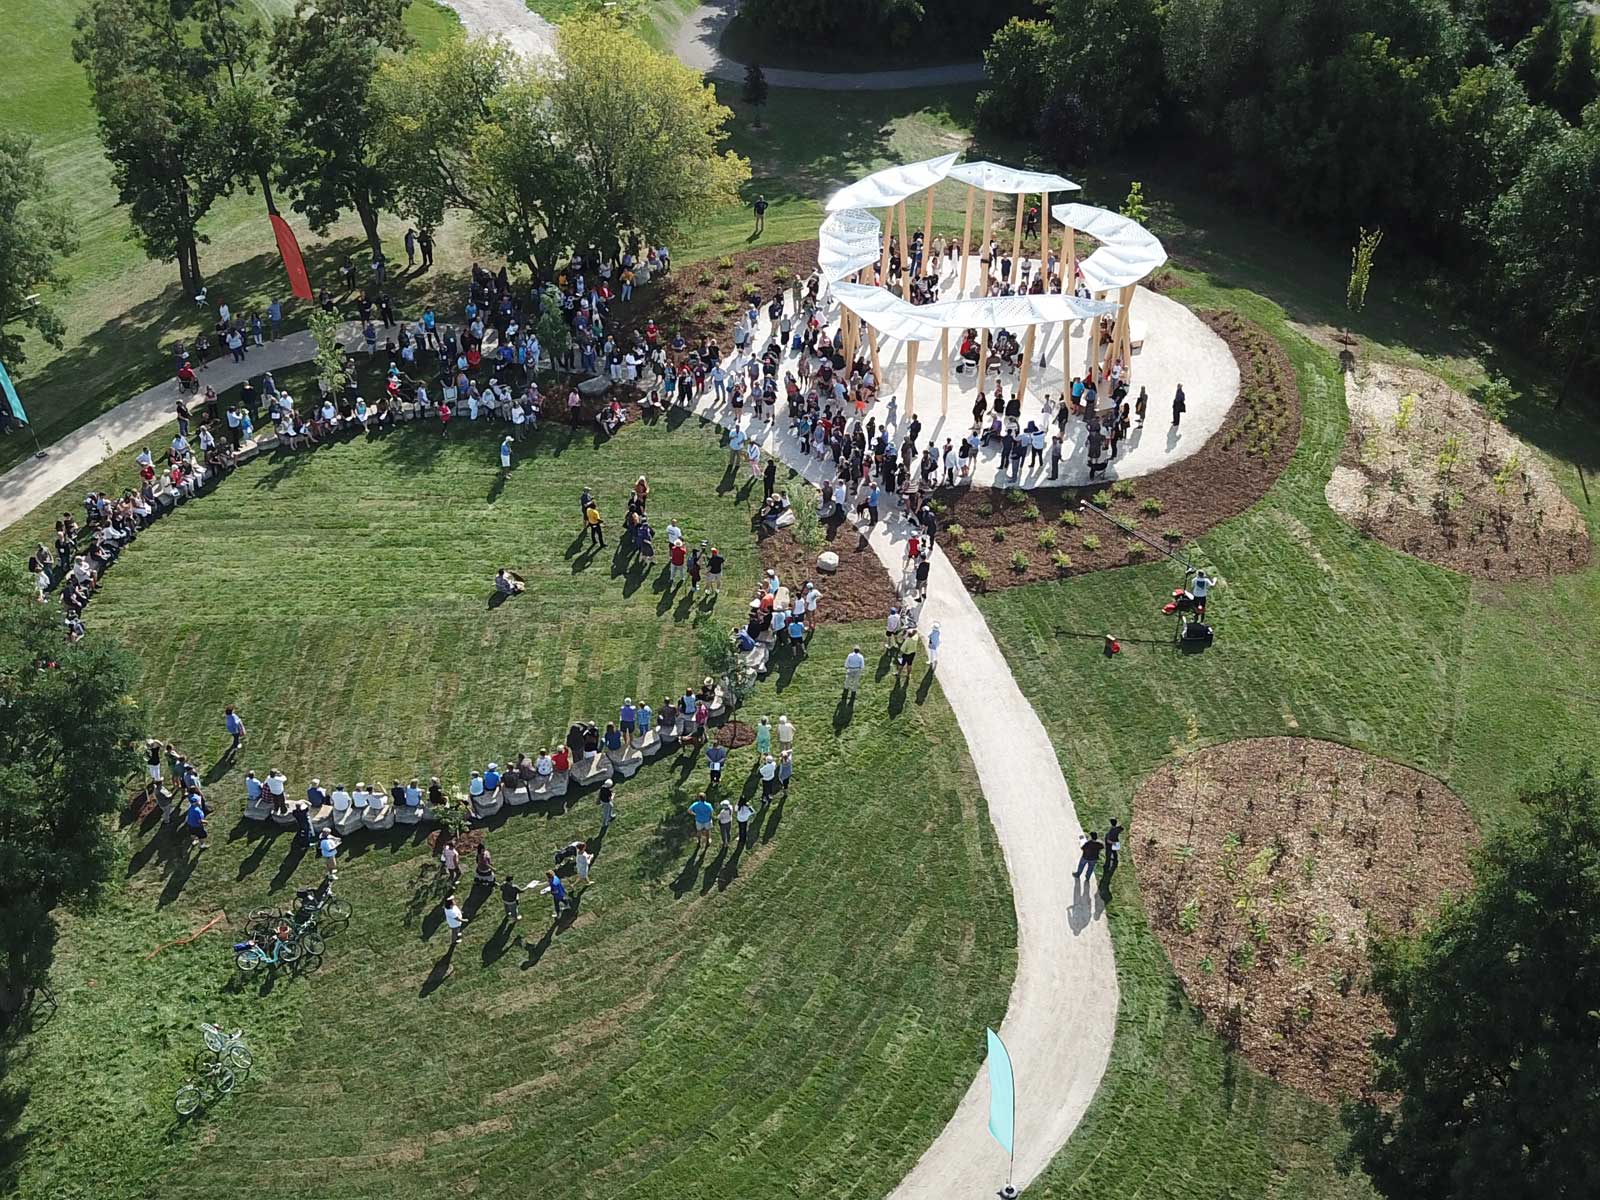 an aerial view of a group of people standing in a circle.